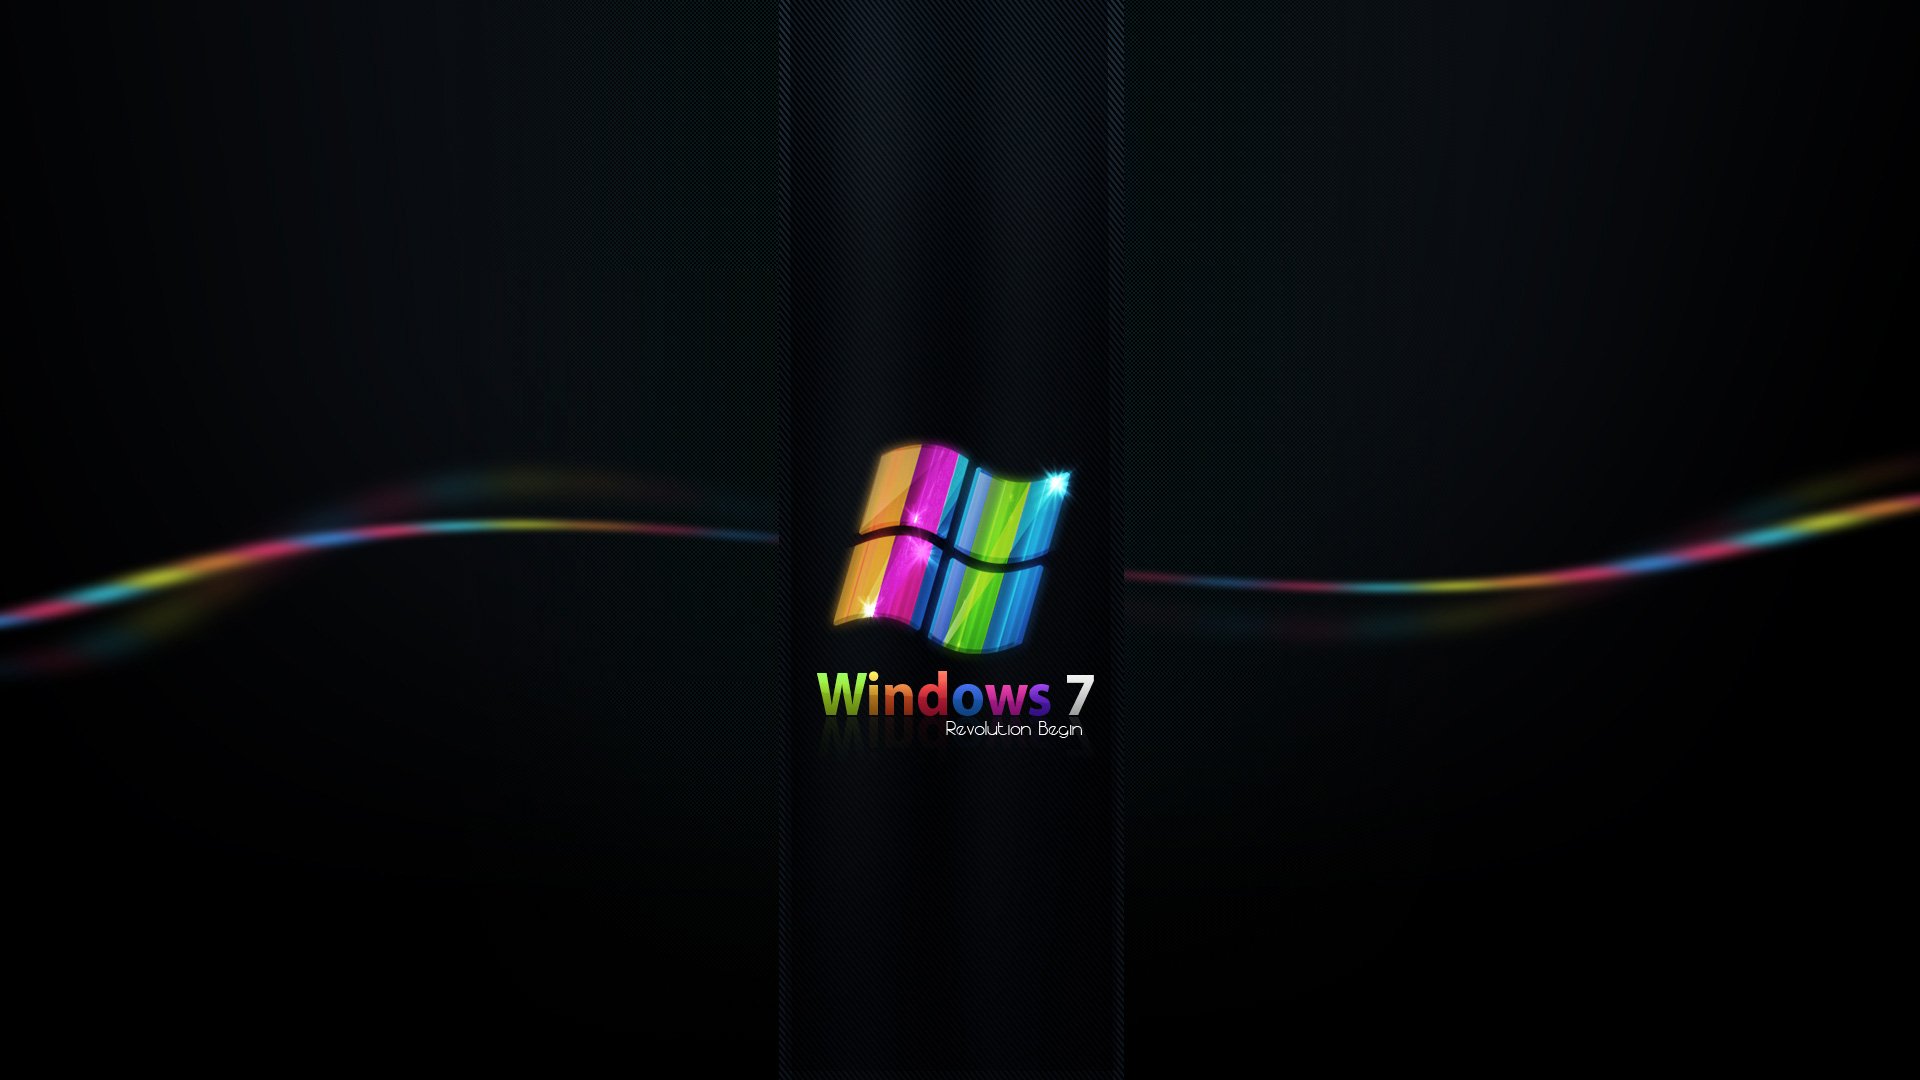 Rainbow Colored Windows 7 Wallpapers HD Wallpapers 1920x1080